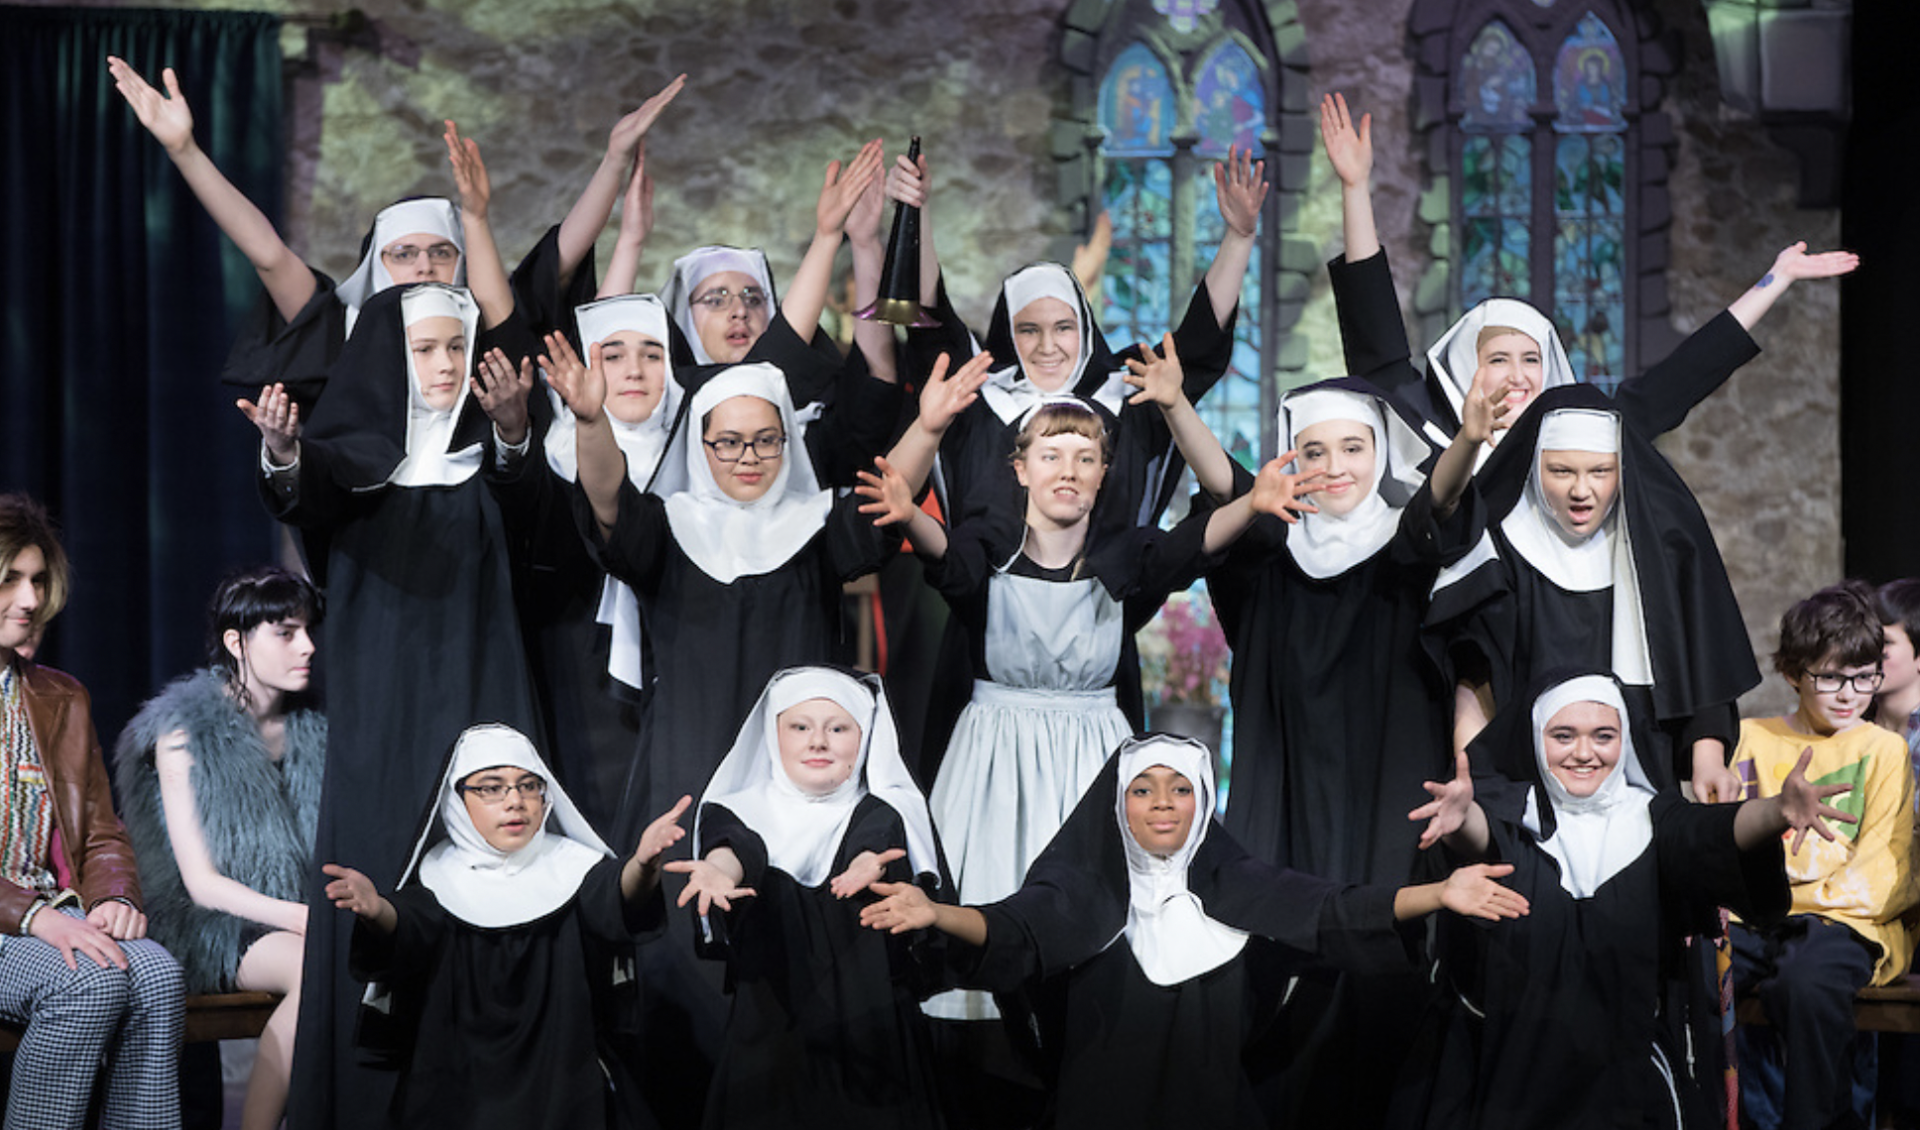 Nuns in Sister Act